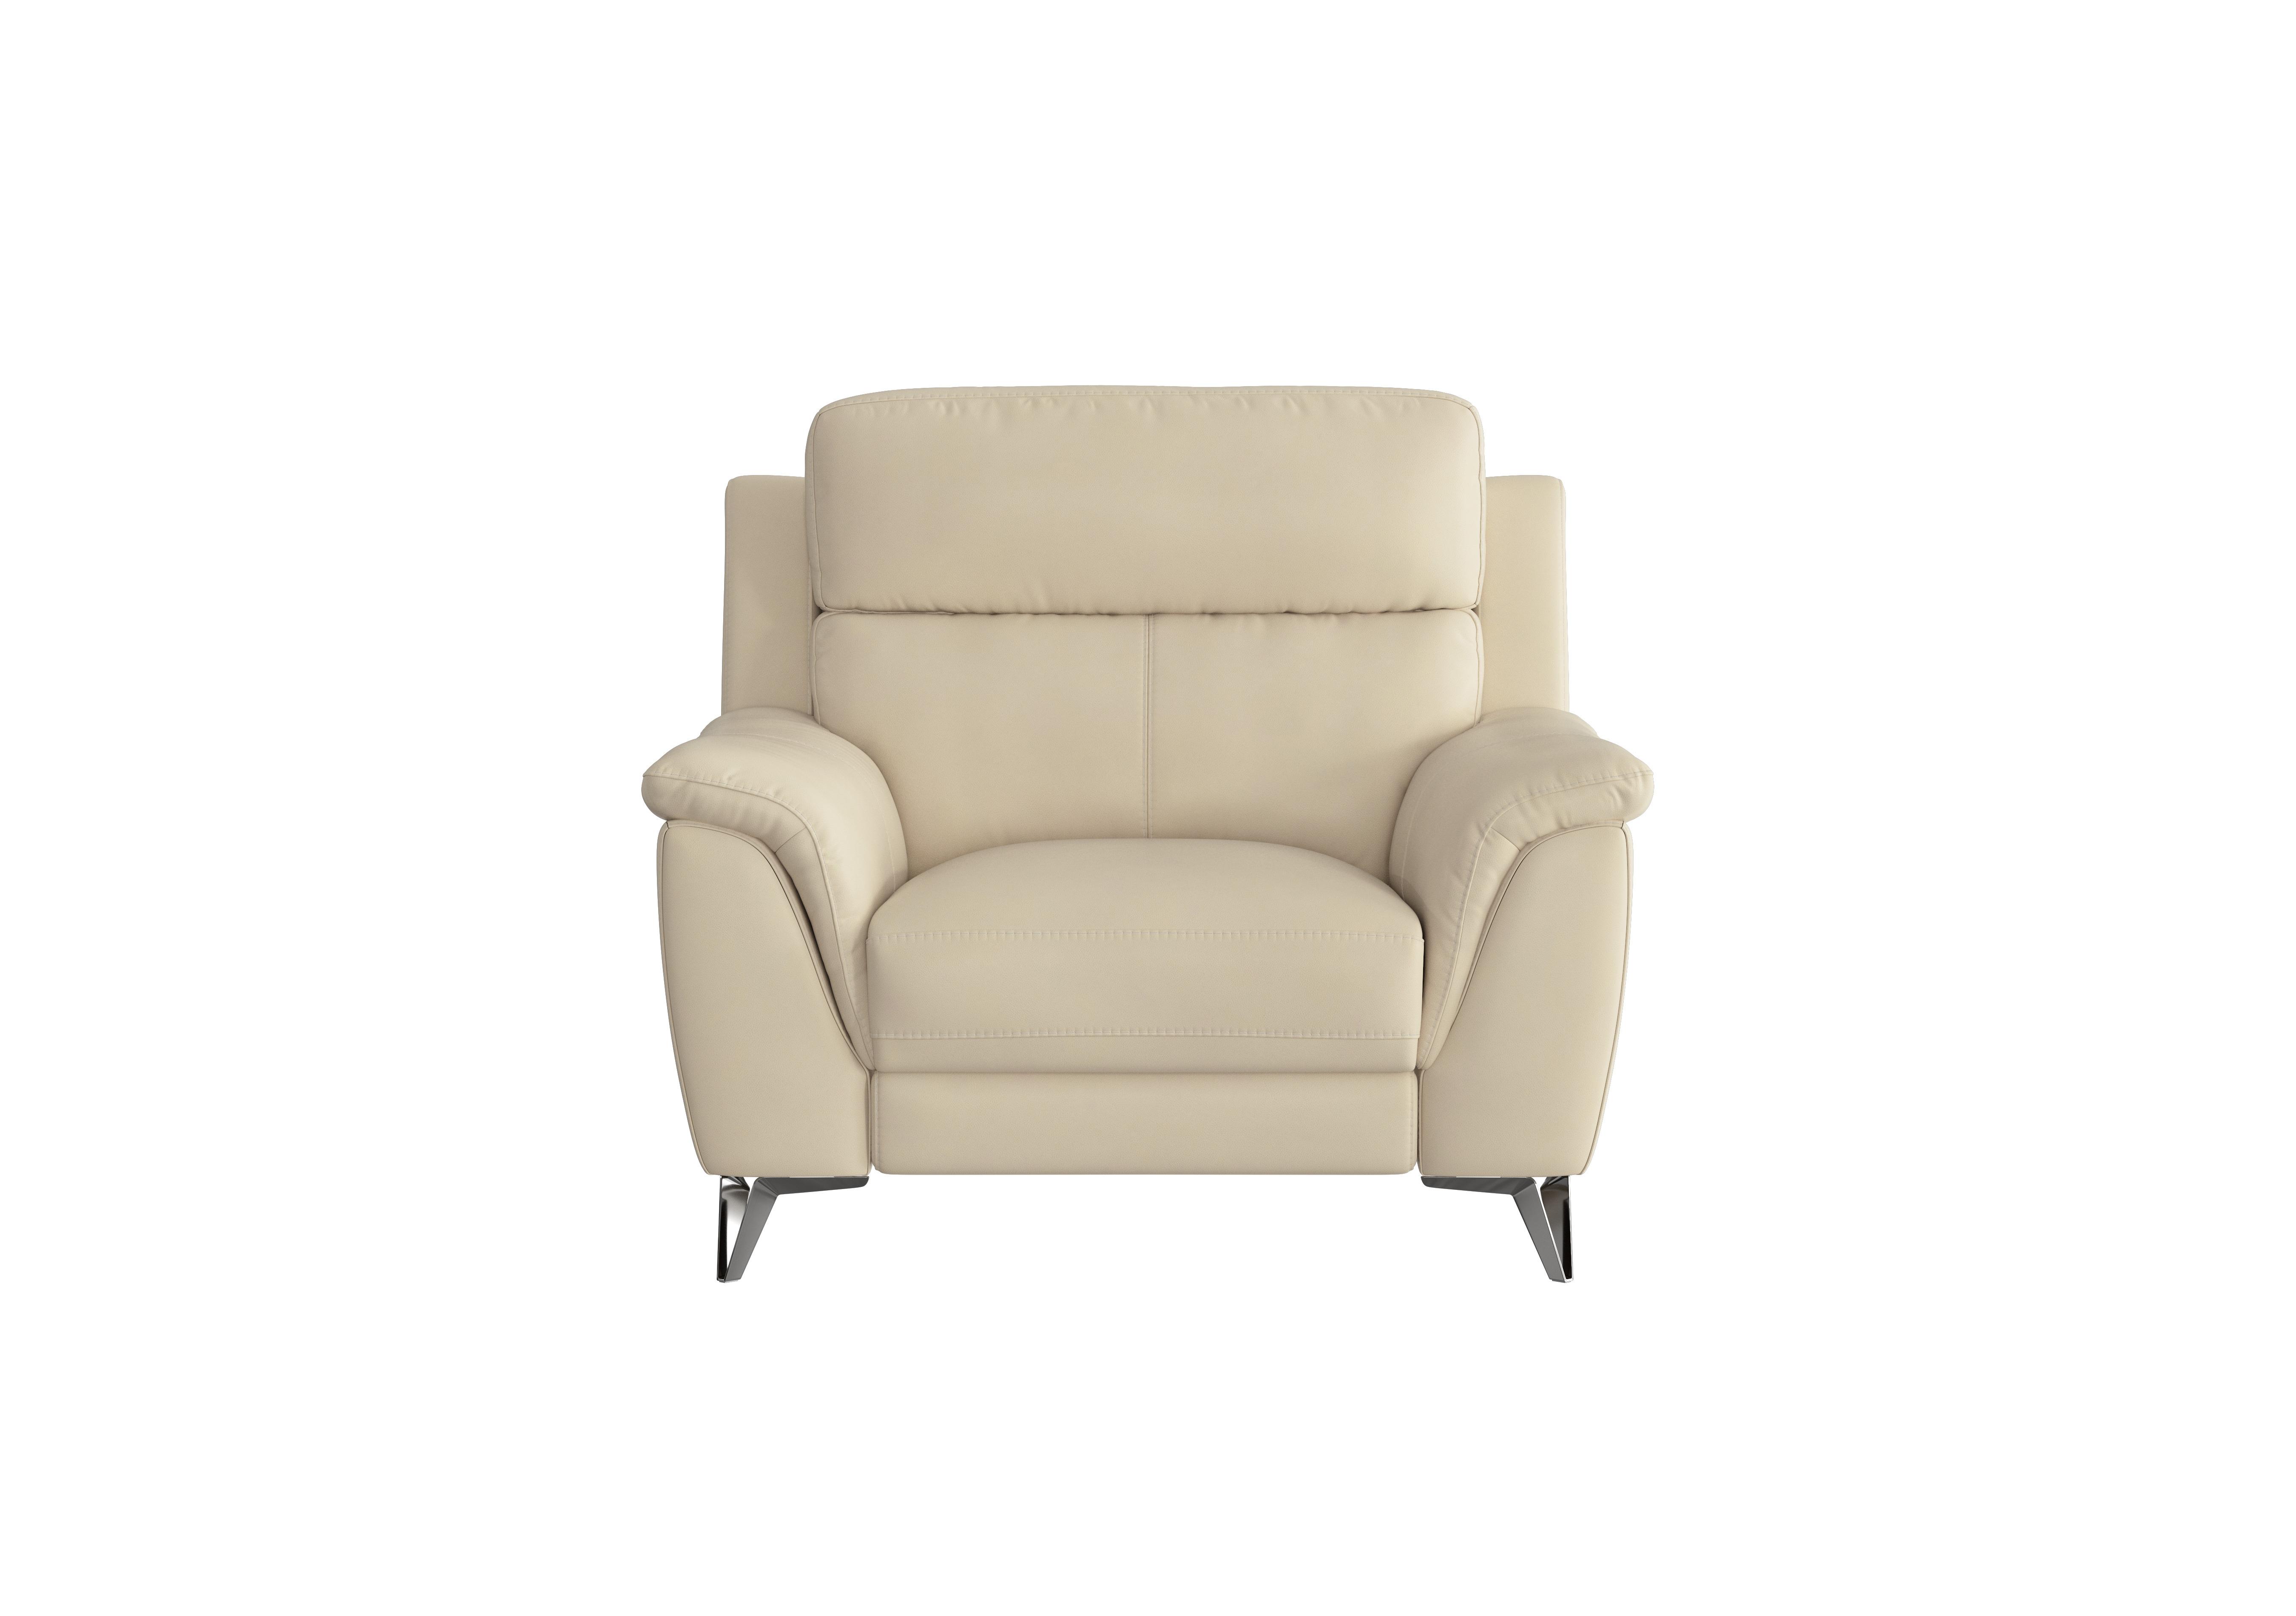 Contempo Leather Armchair in Bv-862c Bisque on Furniture Village